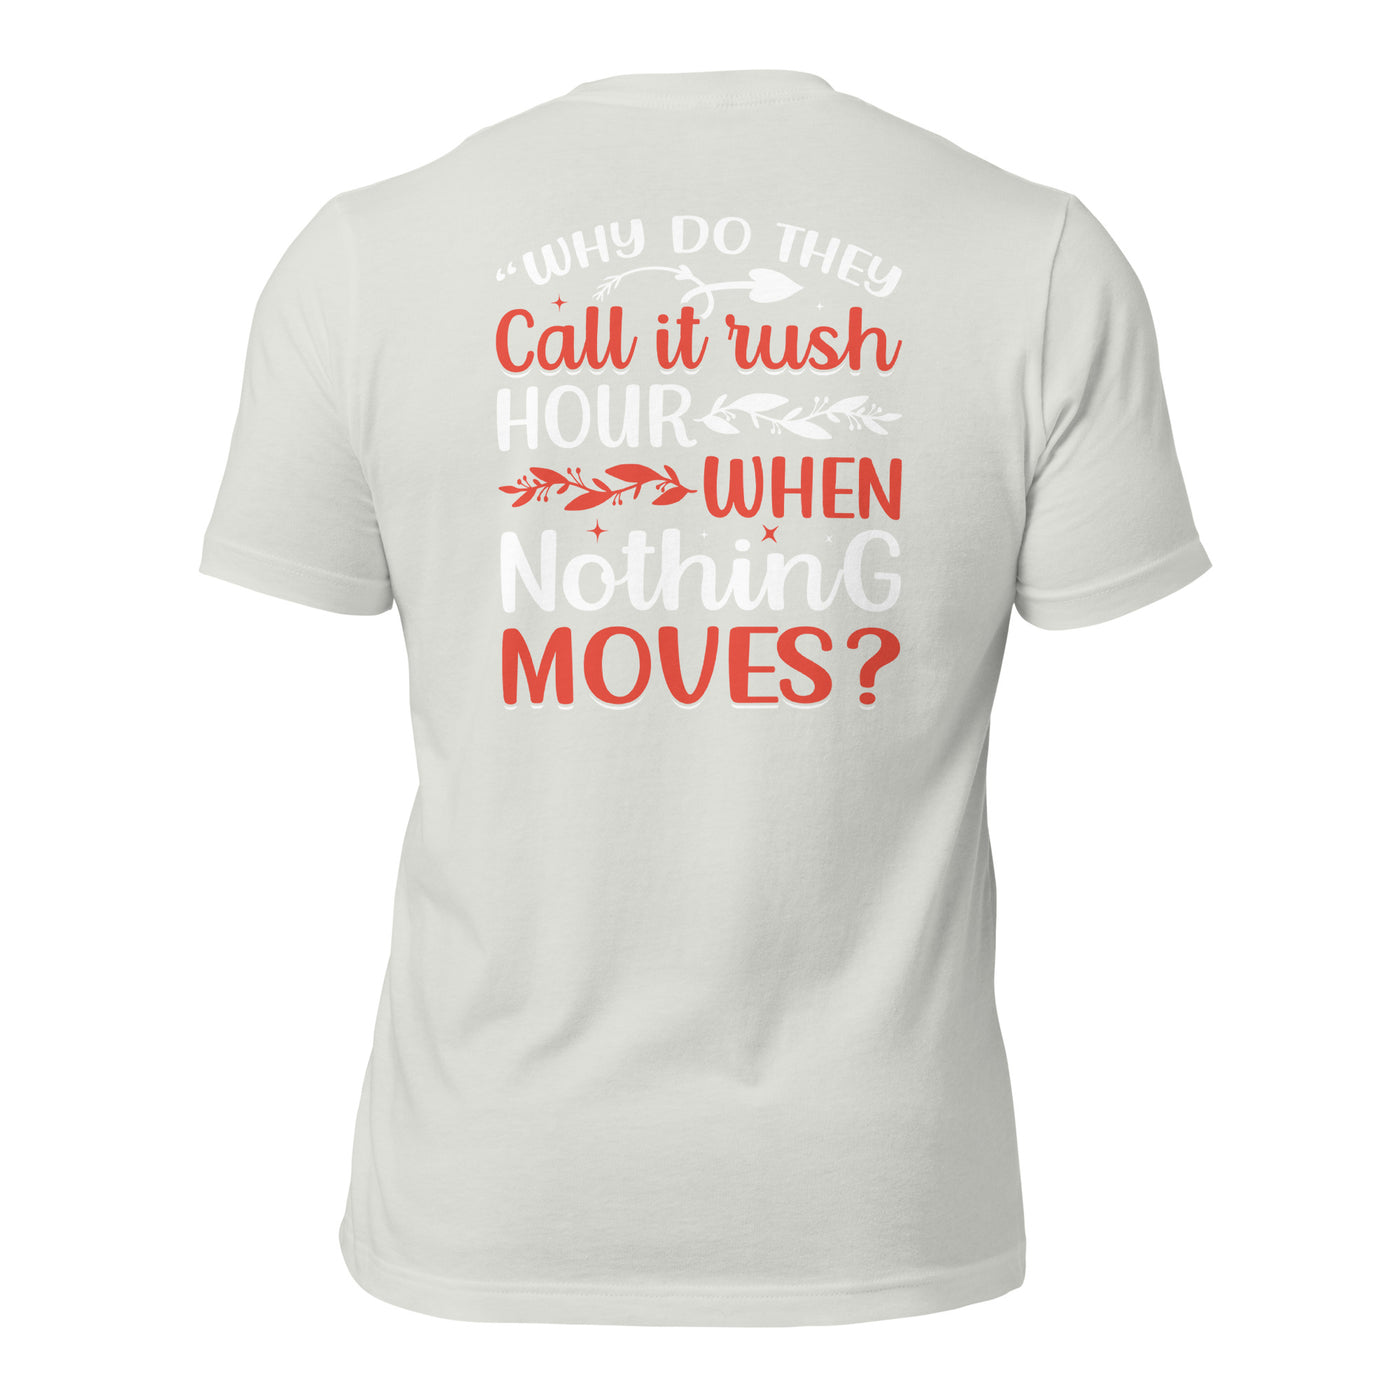 Why do they say Rush Hours, when nothing moves? - Unisex t-shirt